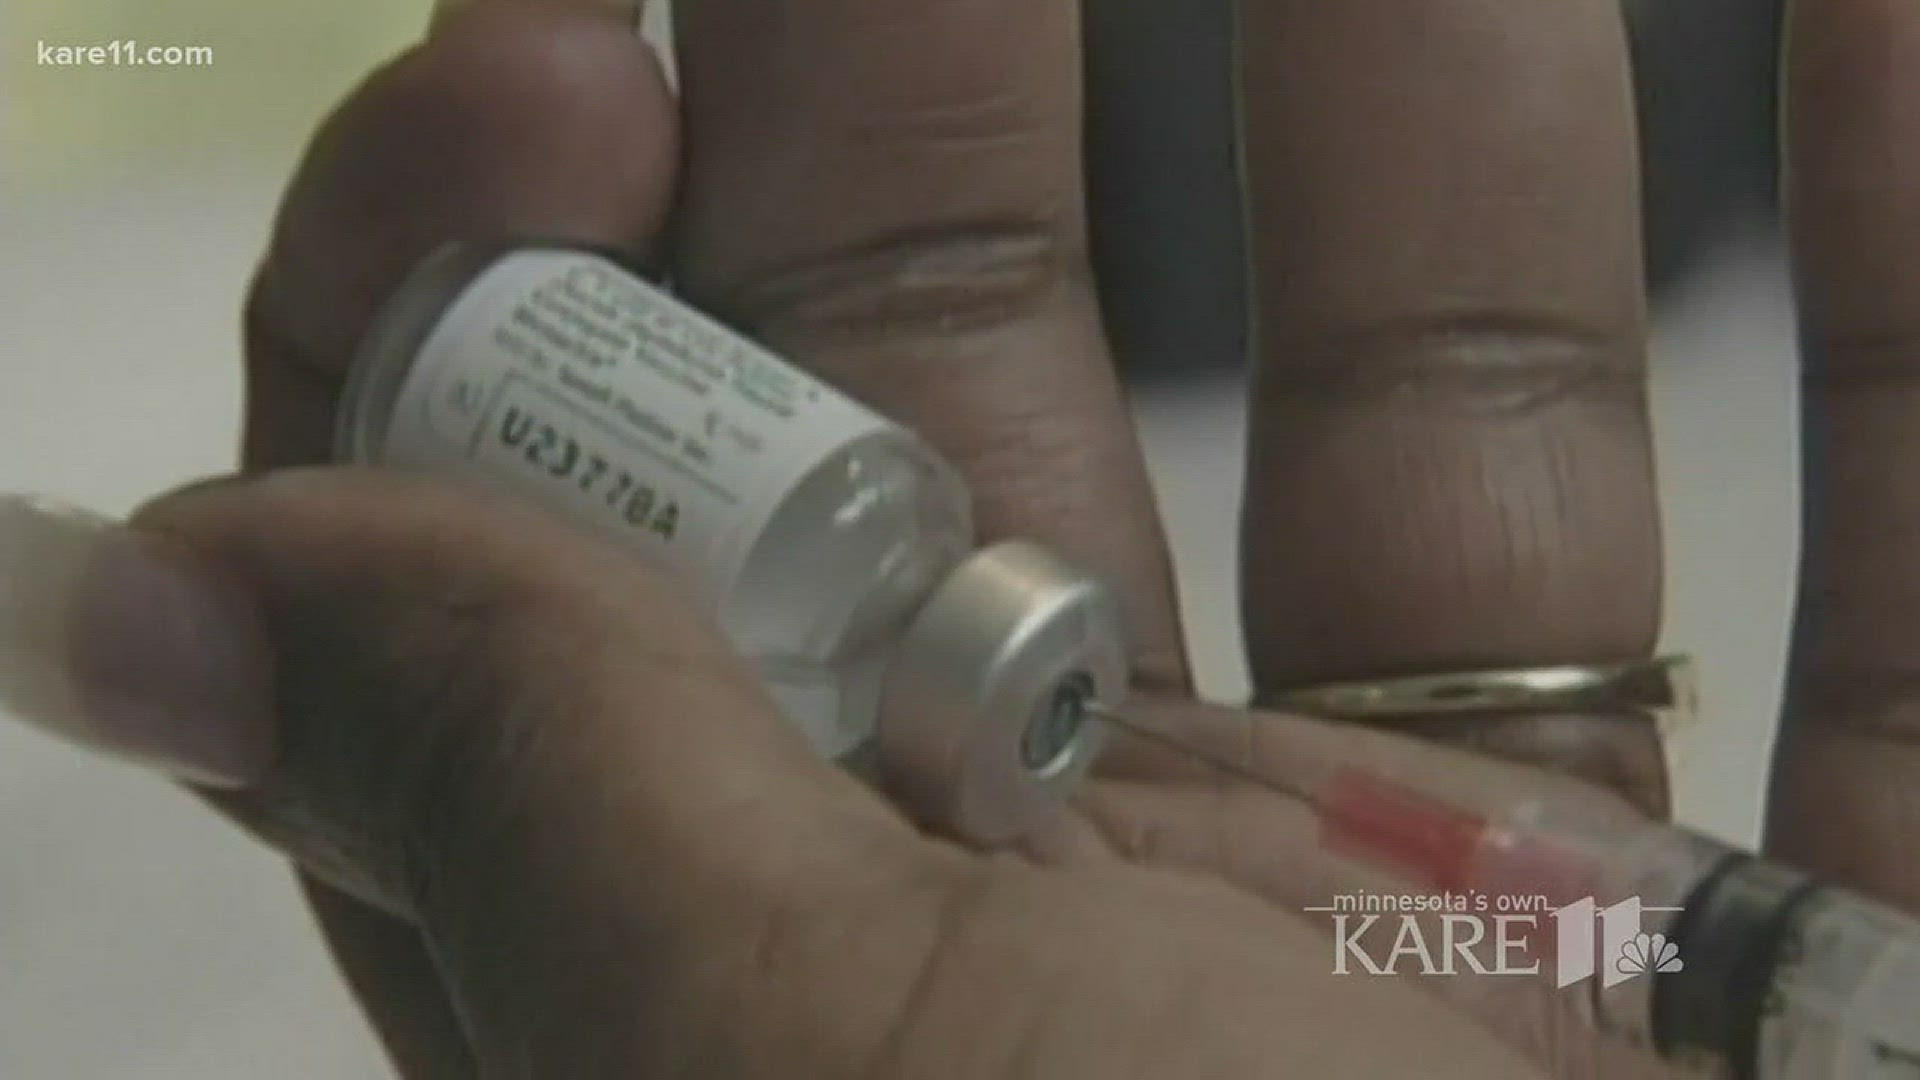 New shingles vaccine recommended for adults over 50